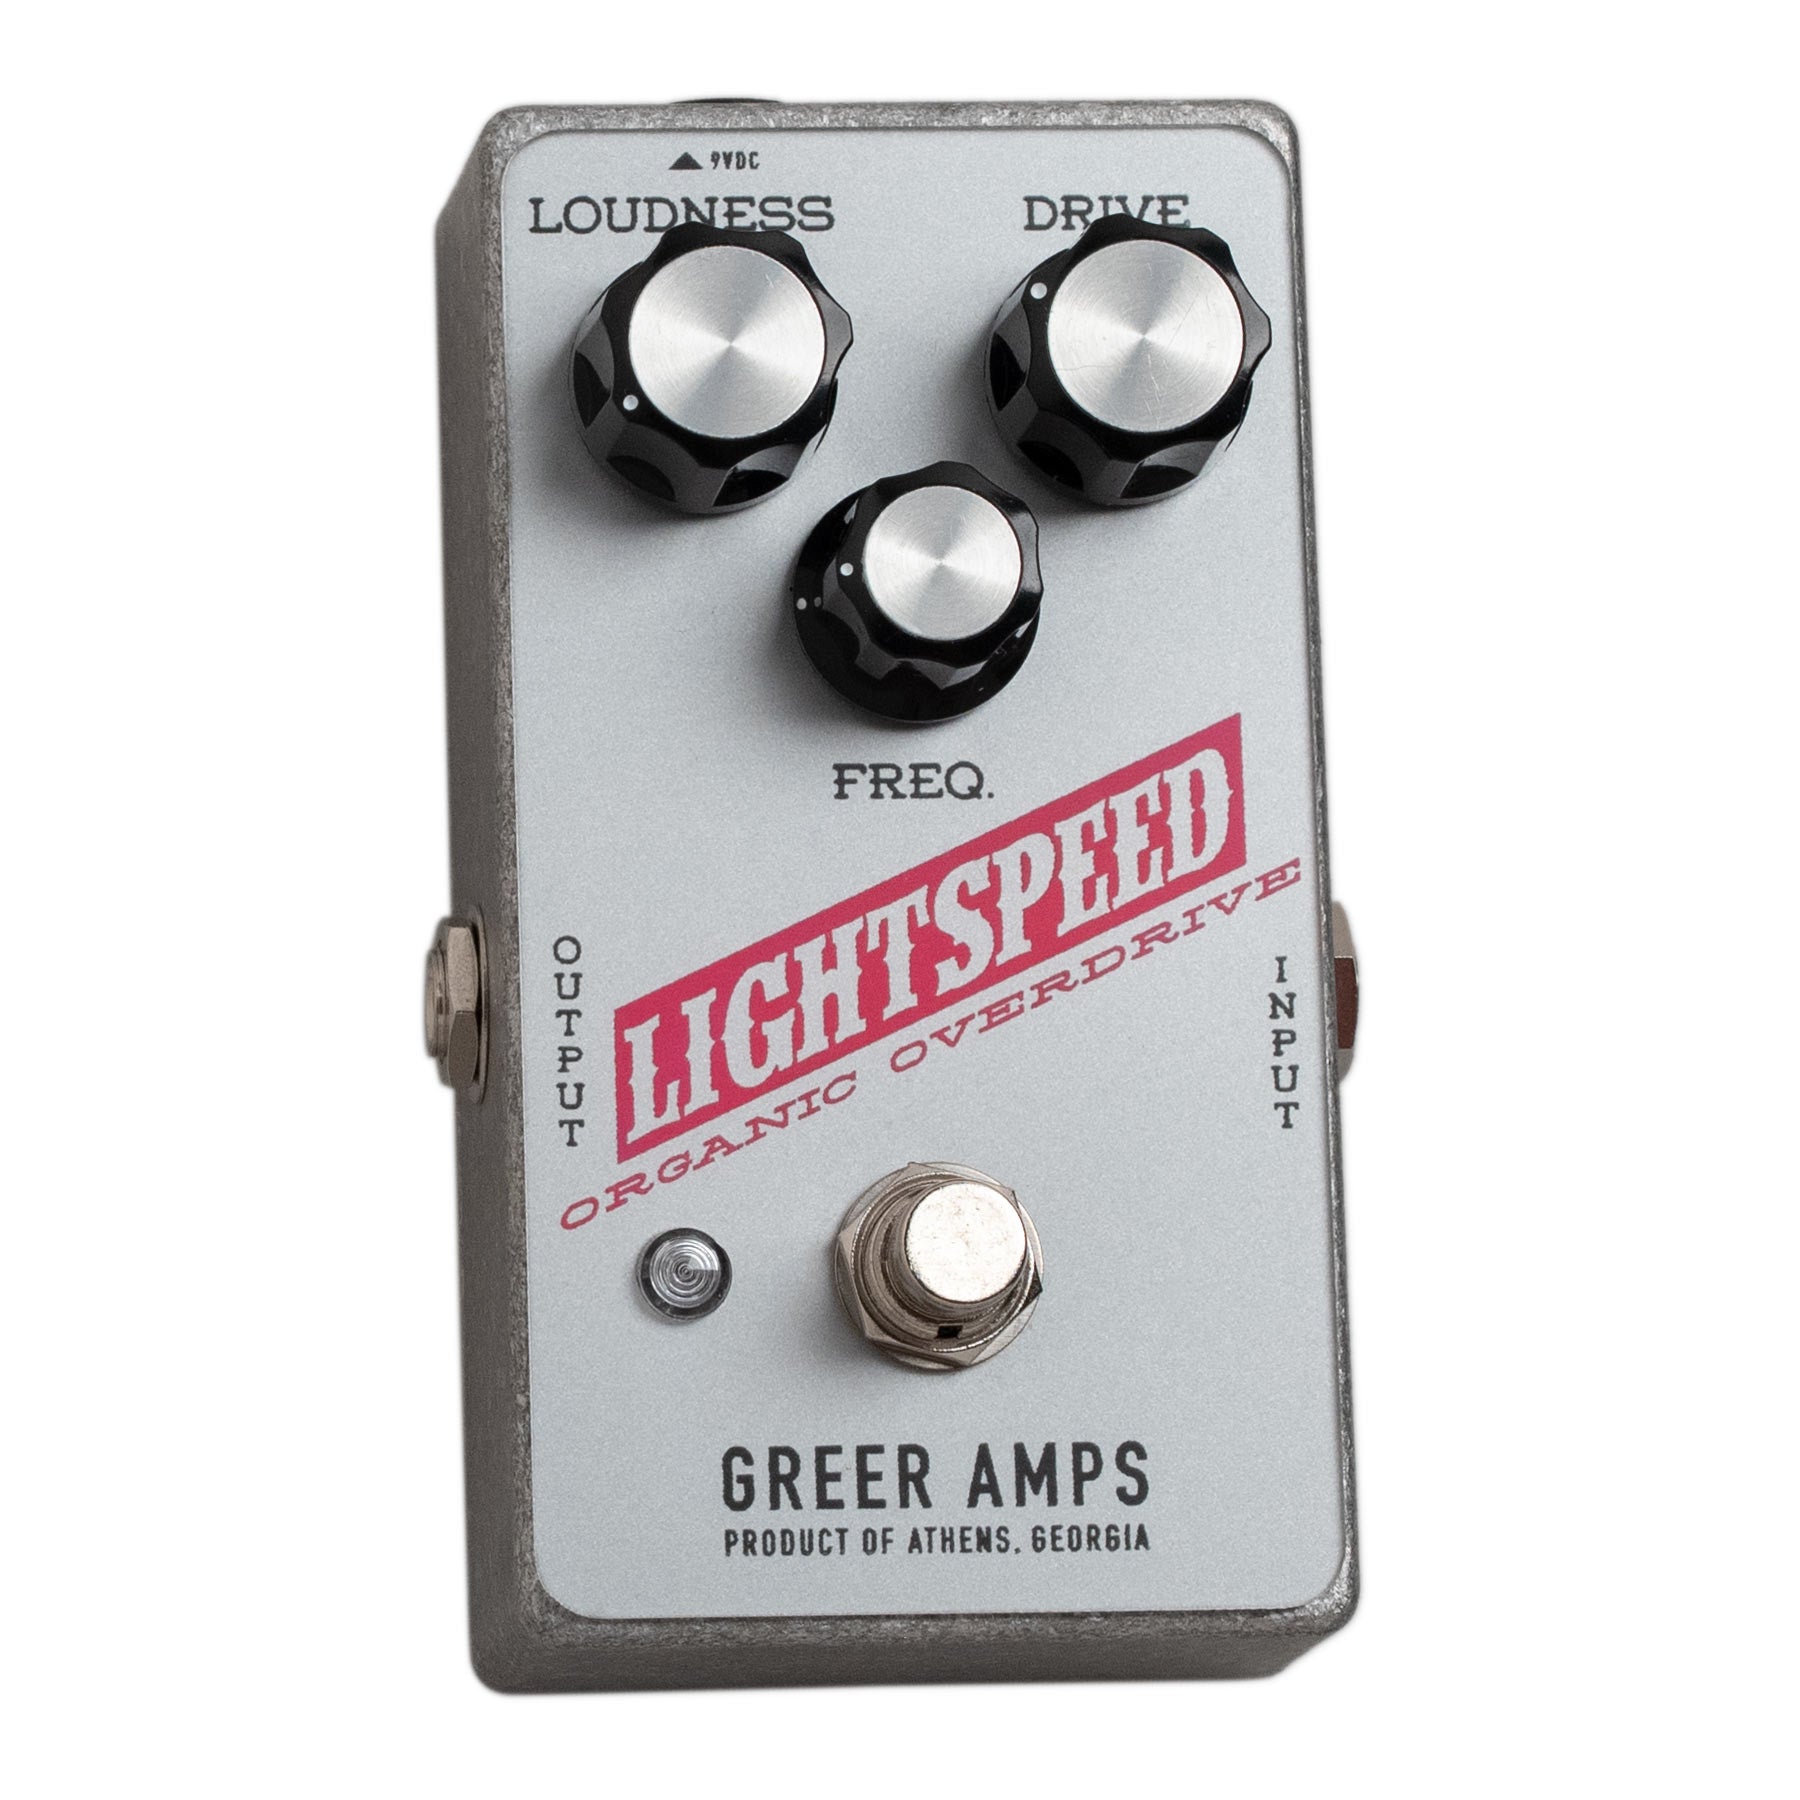 GREER AMPS LIGHTSPEED ORGANIC OVERDRIVE - LIMITED EDITION ELECTROPINK NIGHT COLORWAY